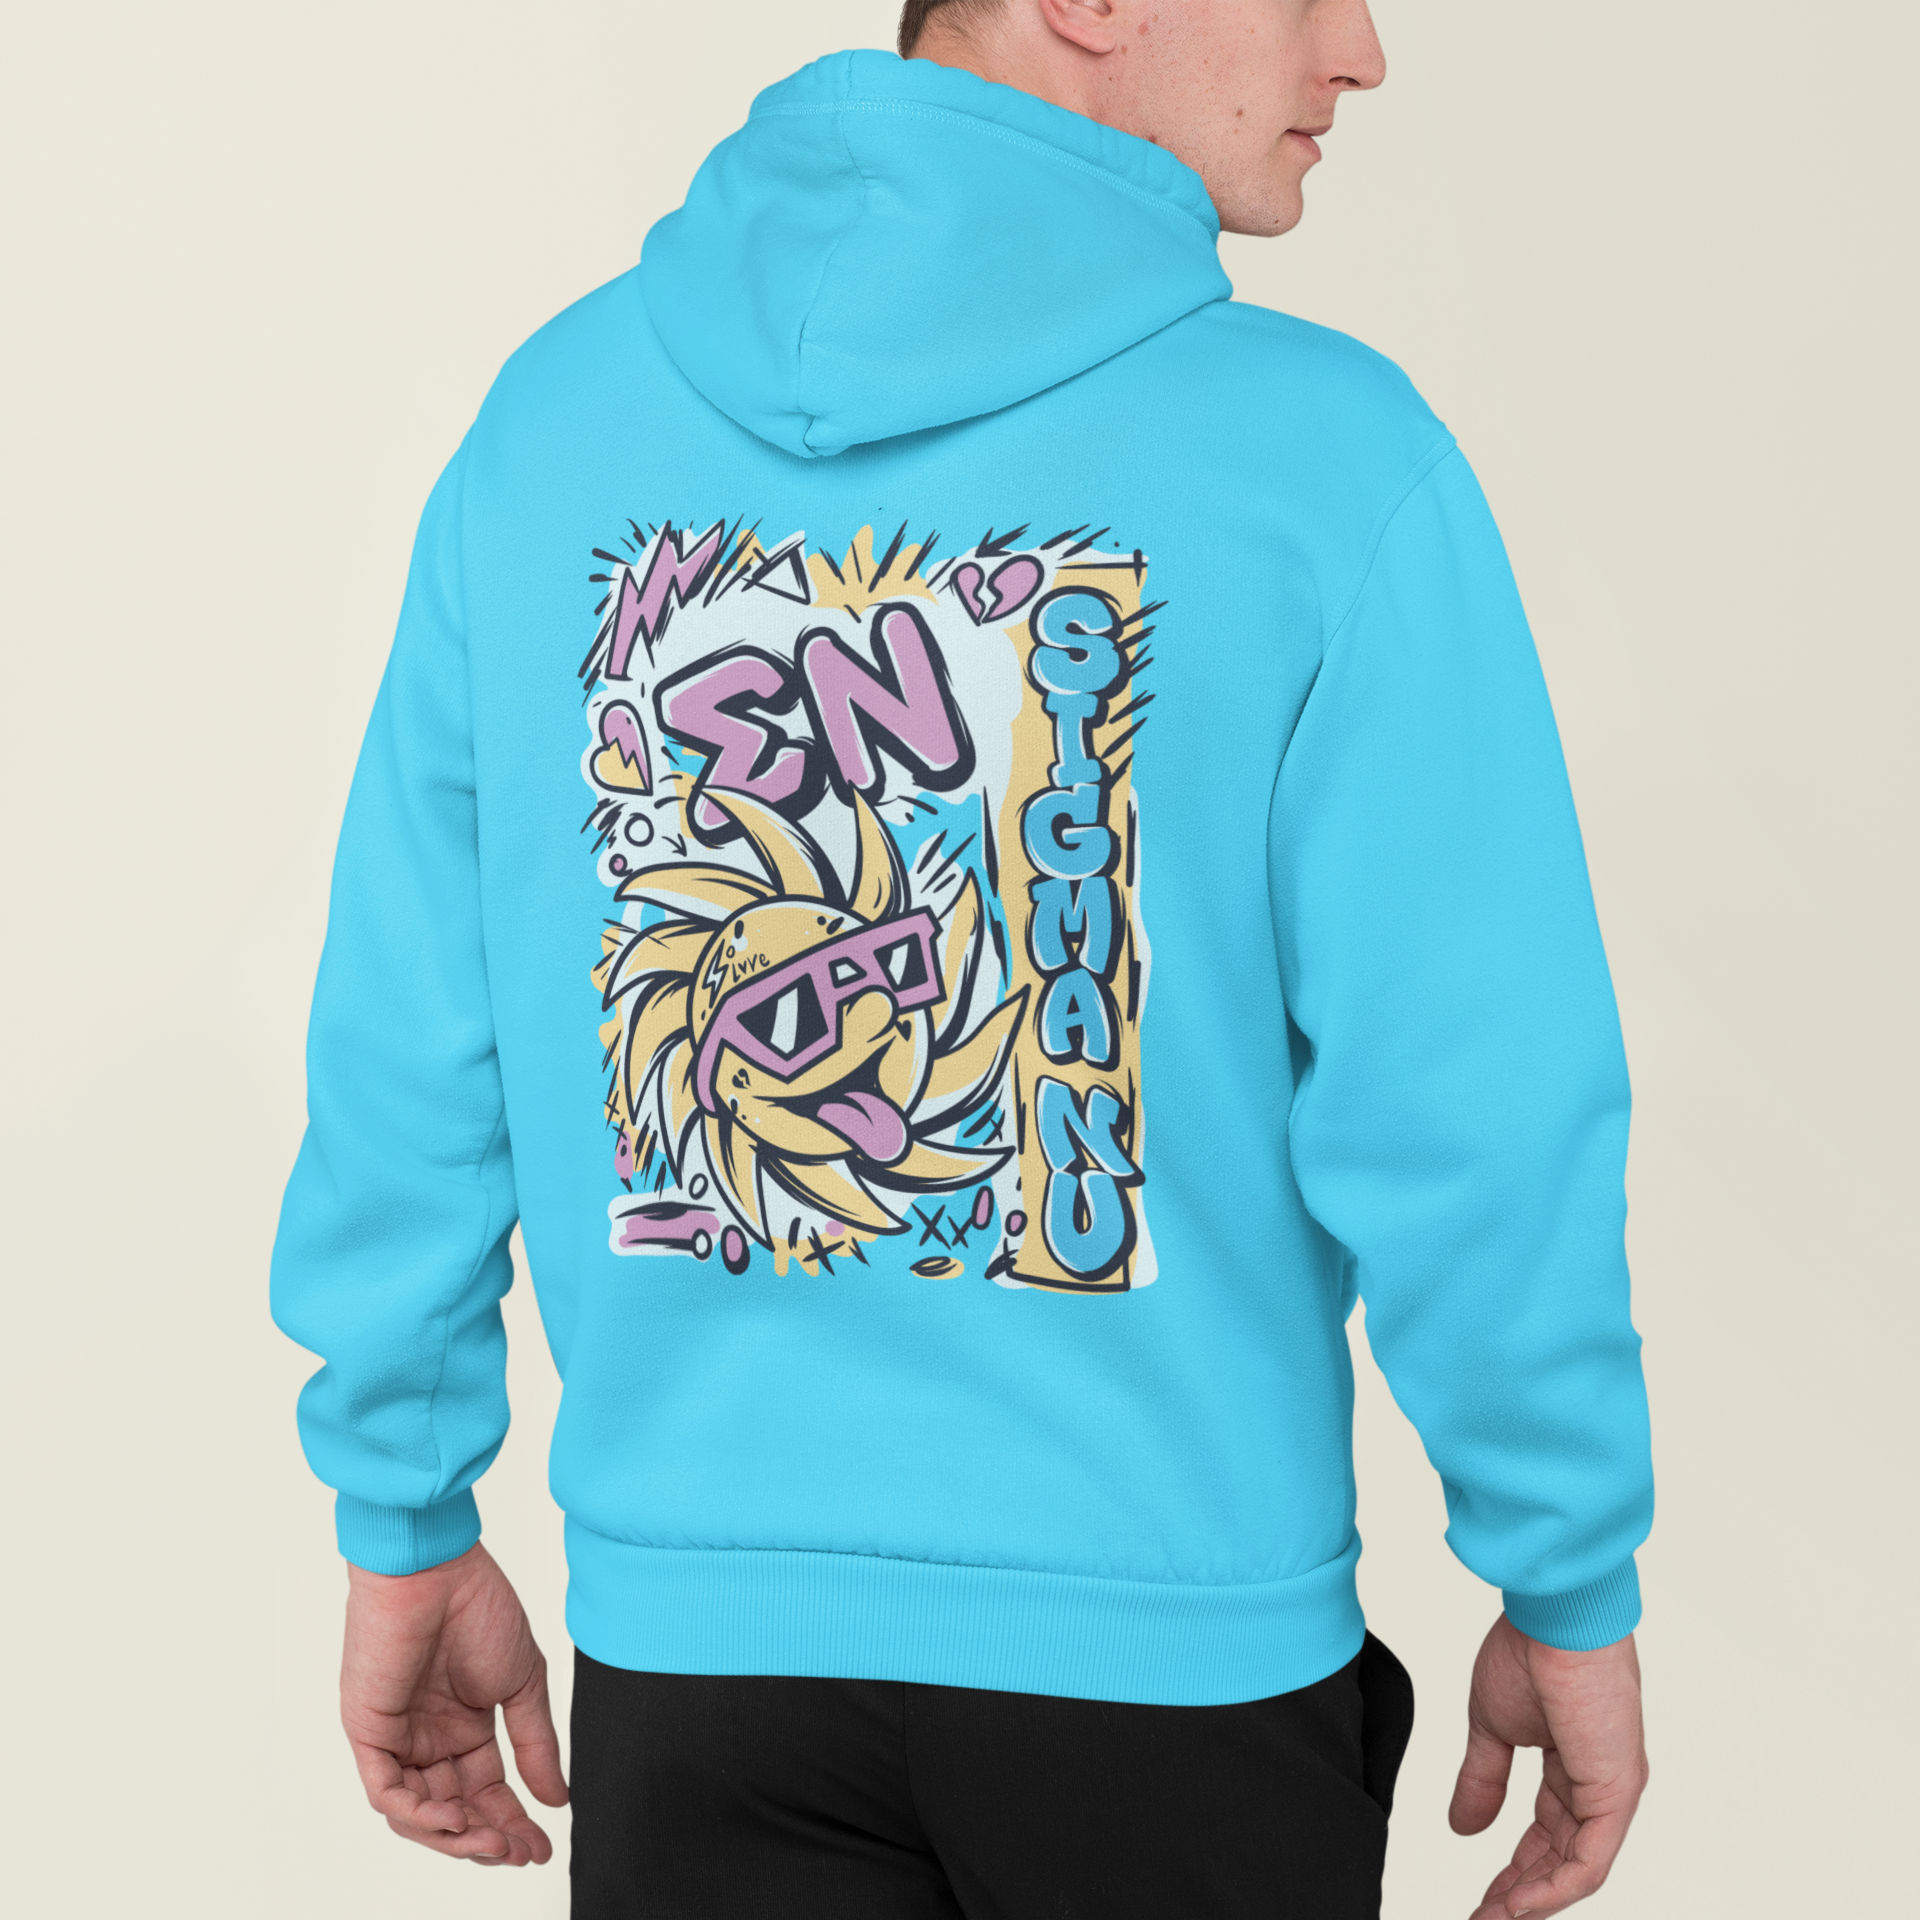 Sigma Nu Graphic Hoodie | Fun in the Sun | Sigma Nu Clothing, Apparel and Merchandise model 